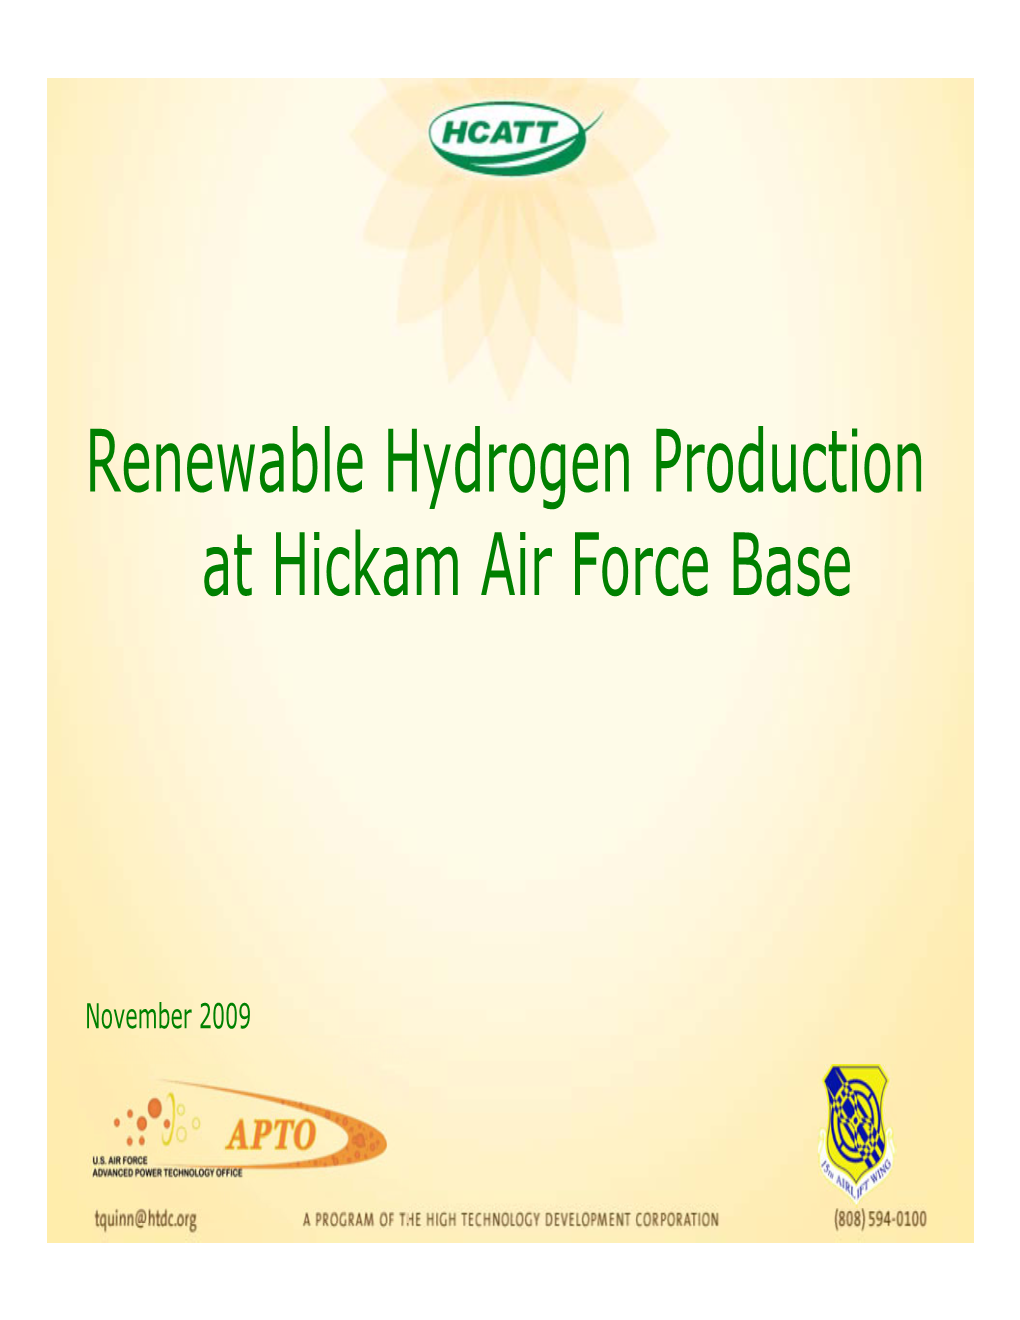 Renewable Hydrogen Production at Hickam Air Force Base